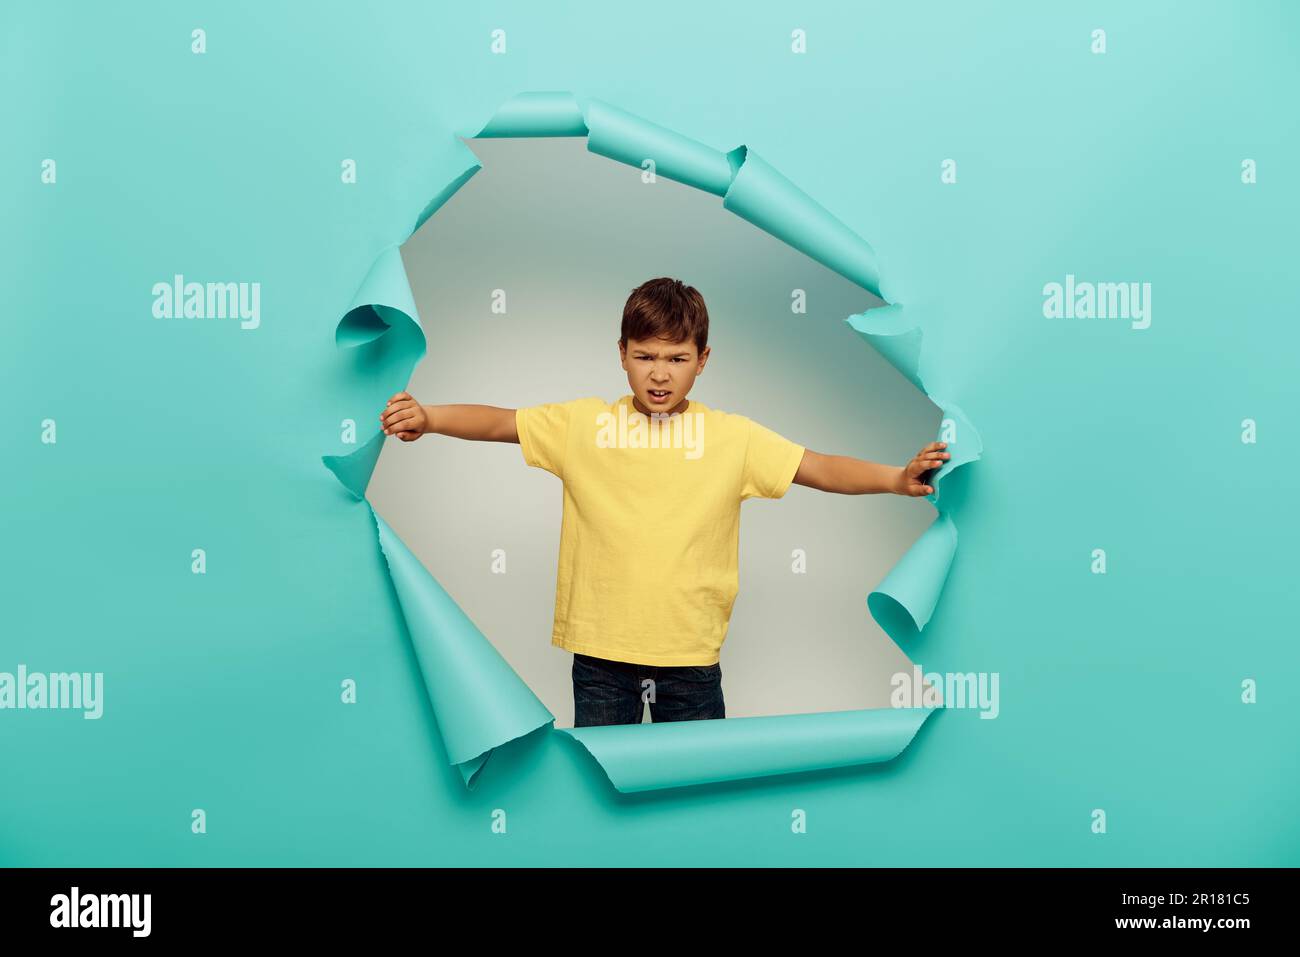 Angry multiracial boy in yellow t-shirt looking at camera during international child protection day while standing behind hole in blue paper on white Stock Photo